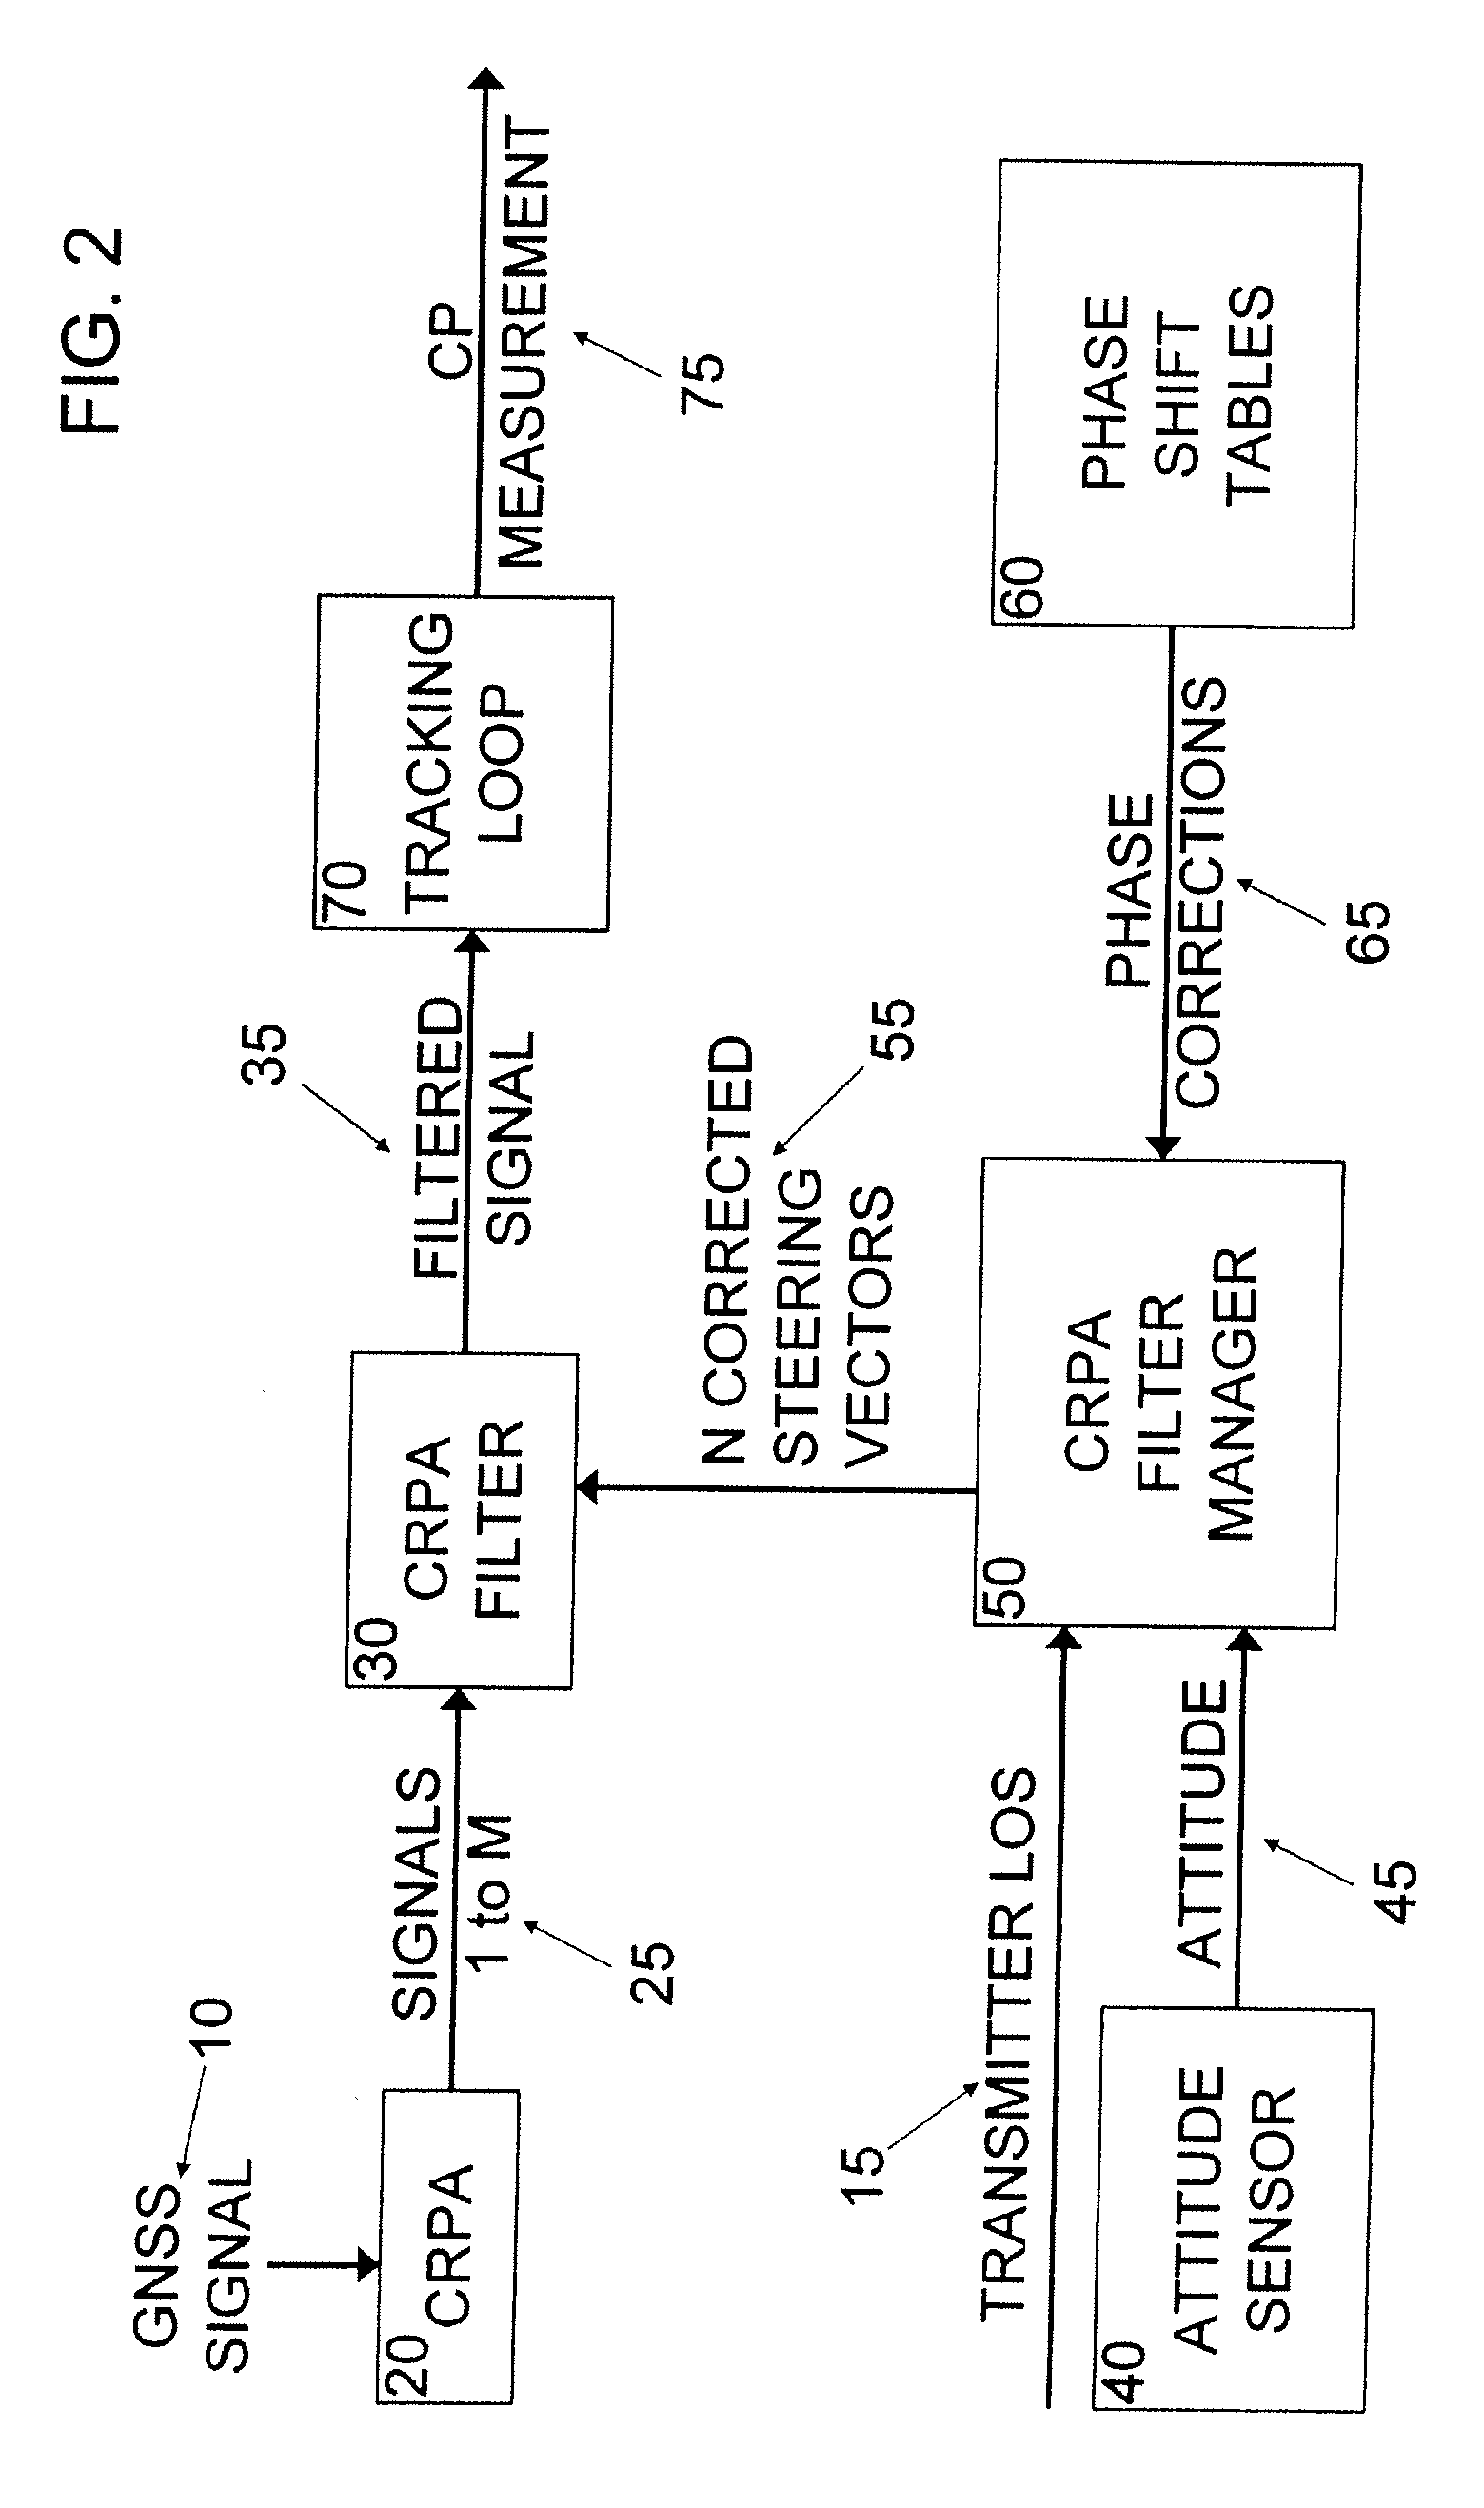 System and method for correcting global navigation satellite system carrier phase measurements in receivers having controlled reception pattern antennas